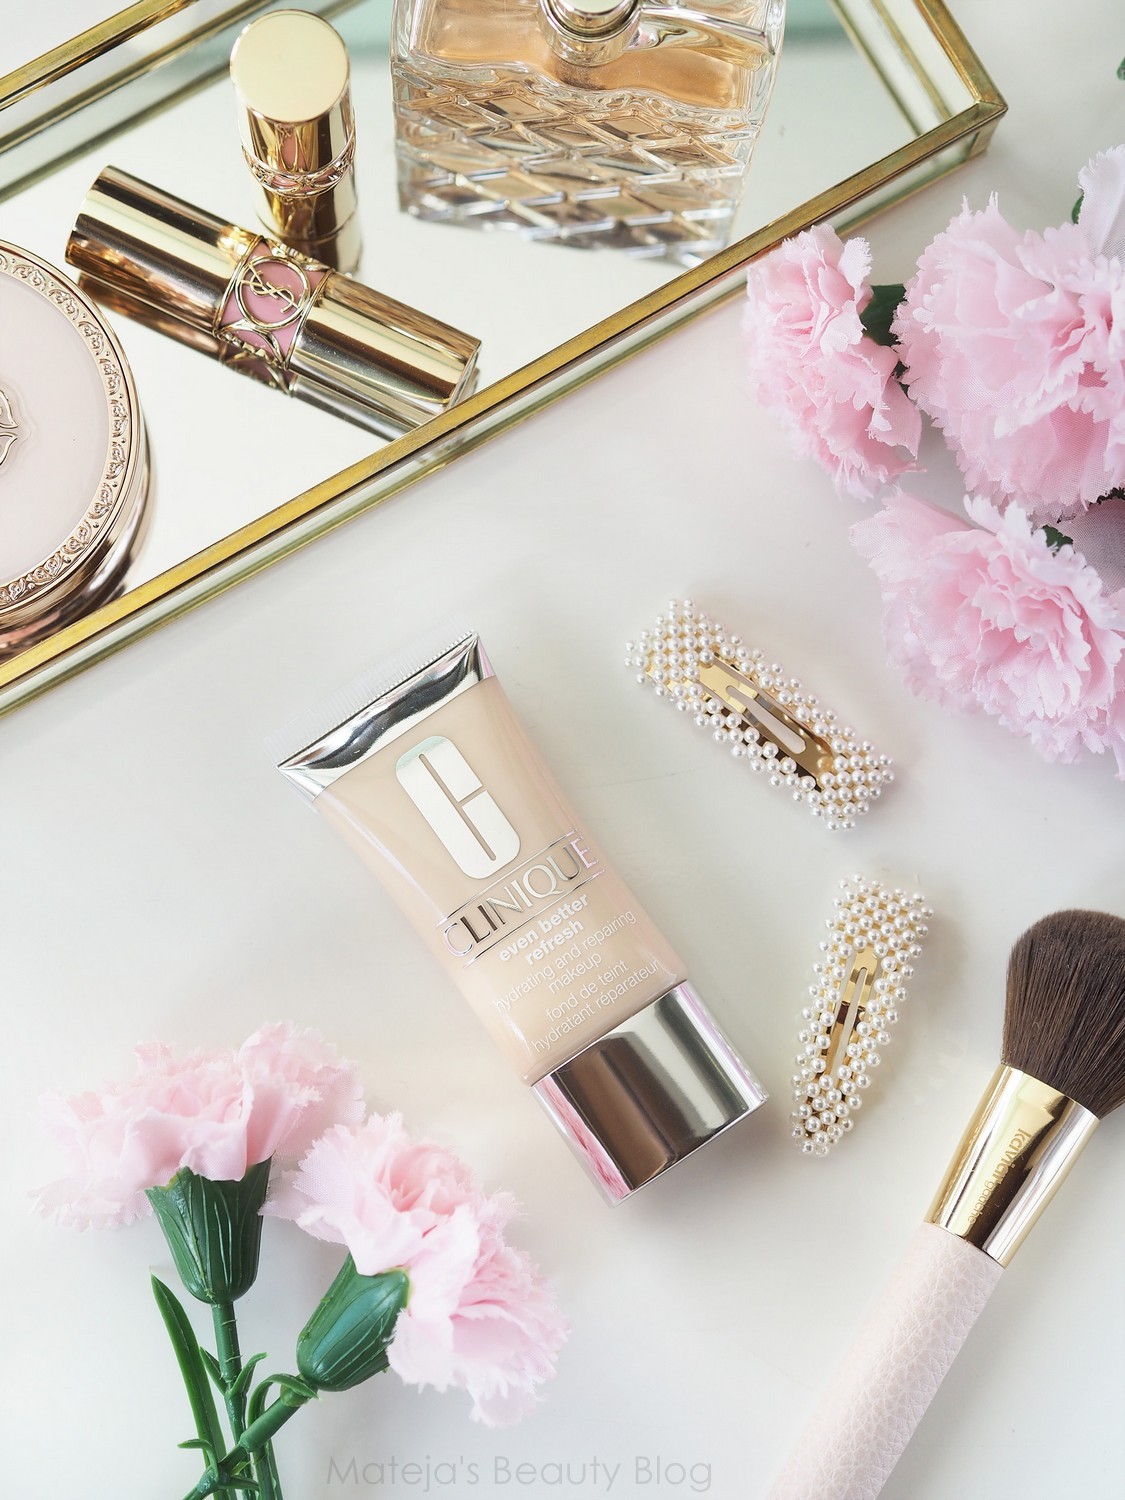 Clinique Even Better Refresh Hydrating and Repairing Makeup Full-Coverage Foundation